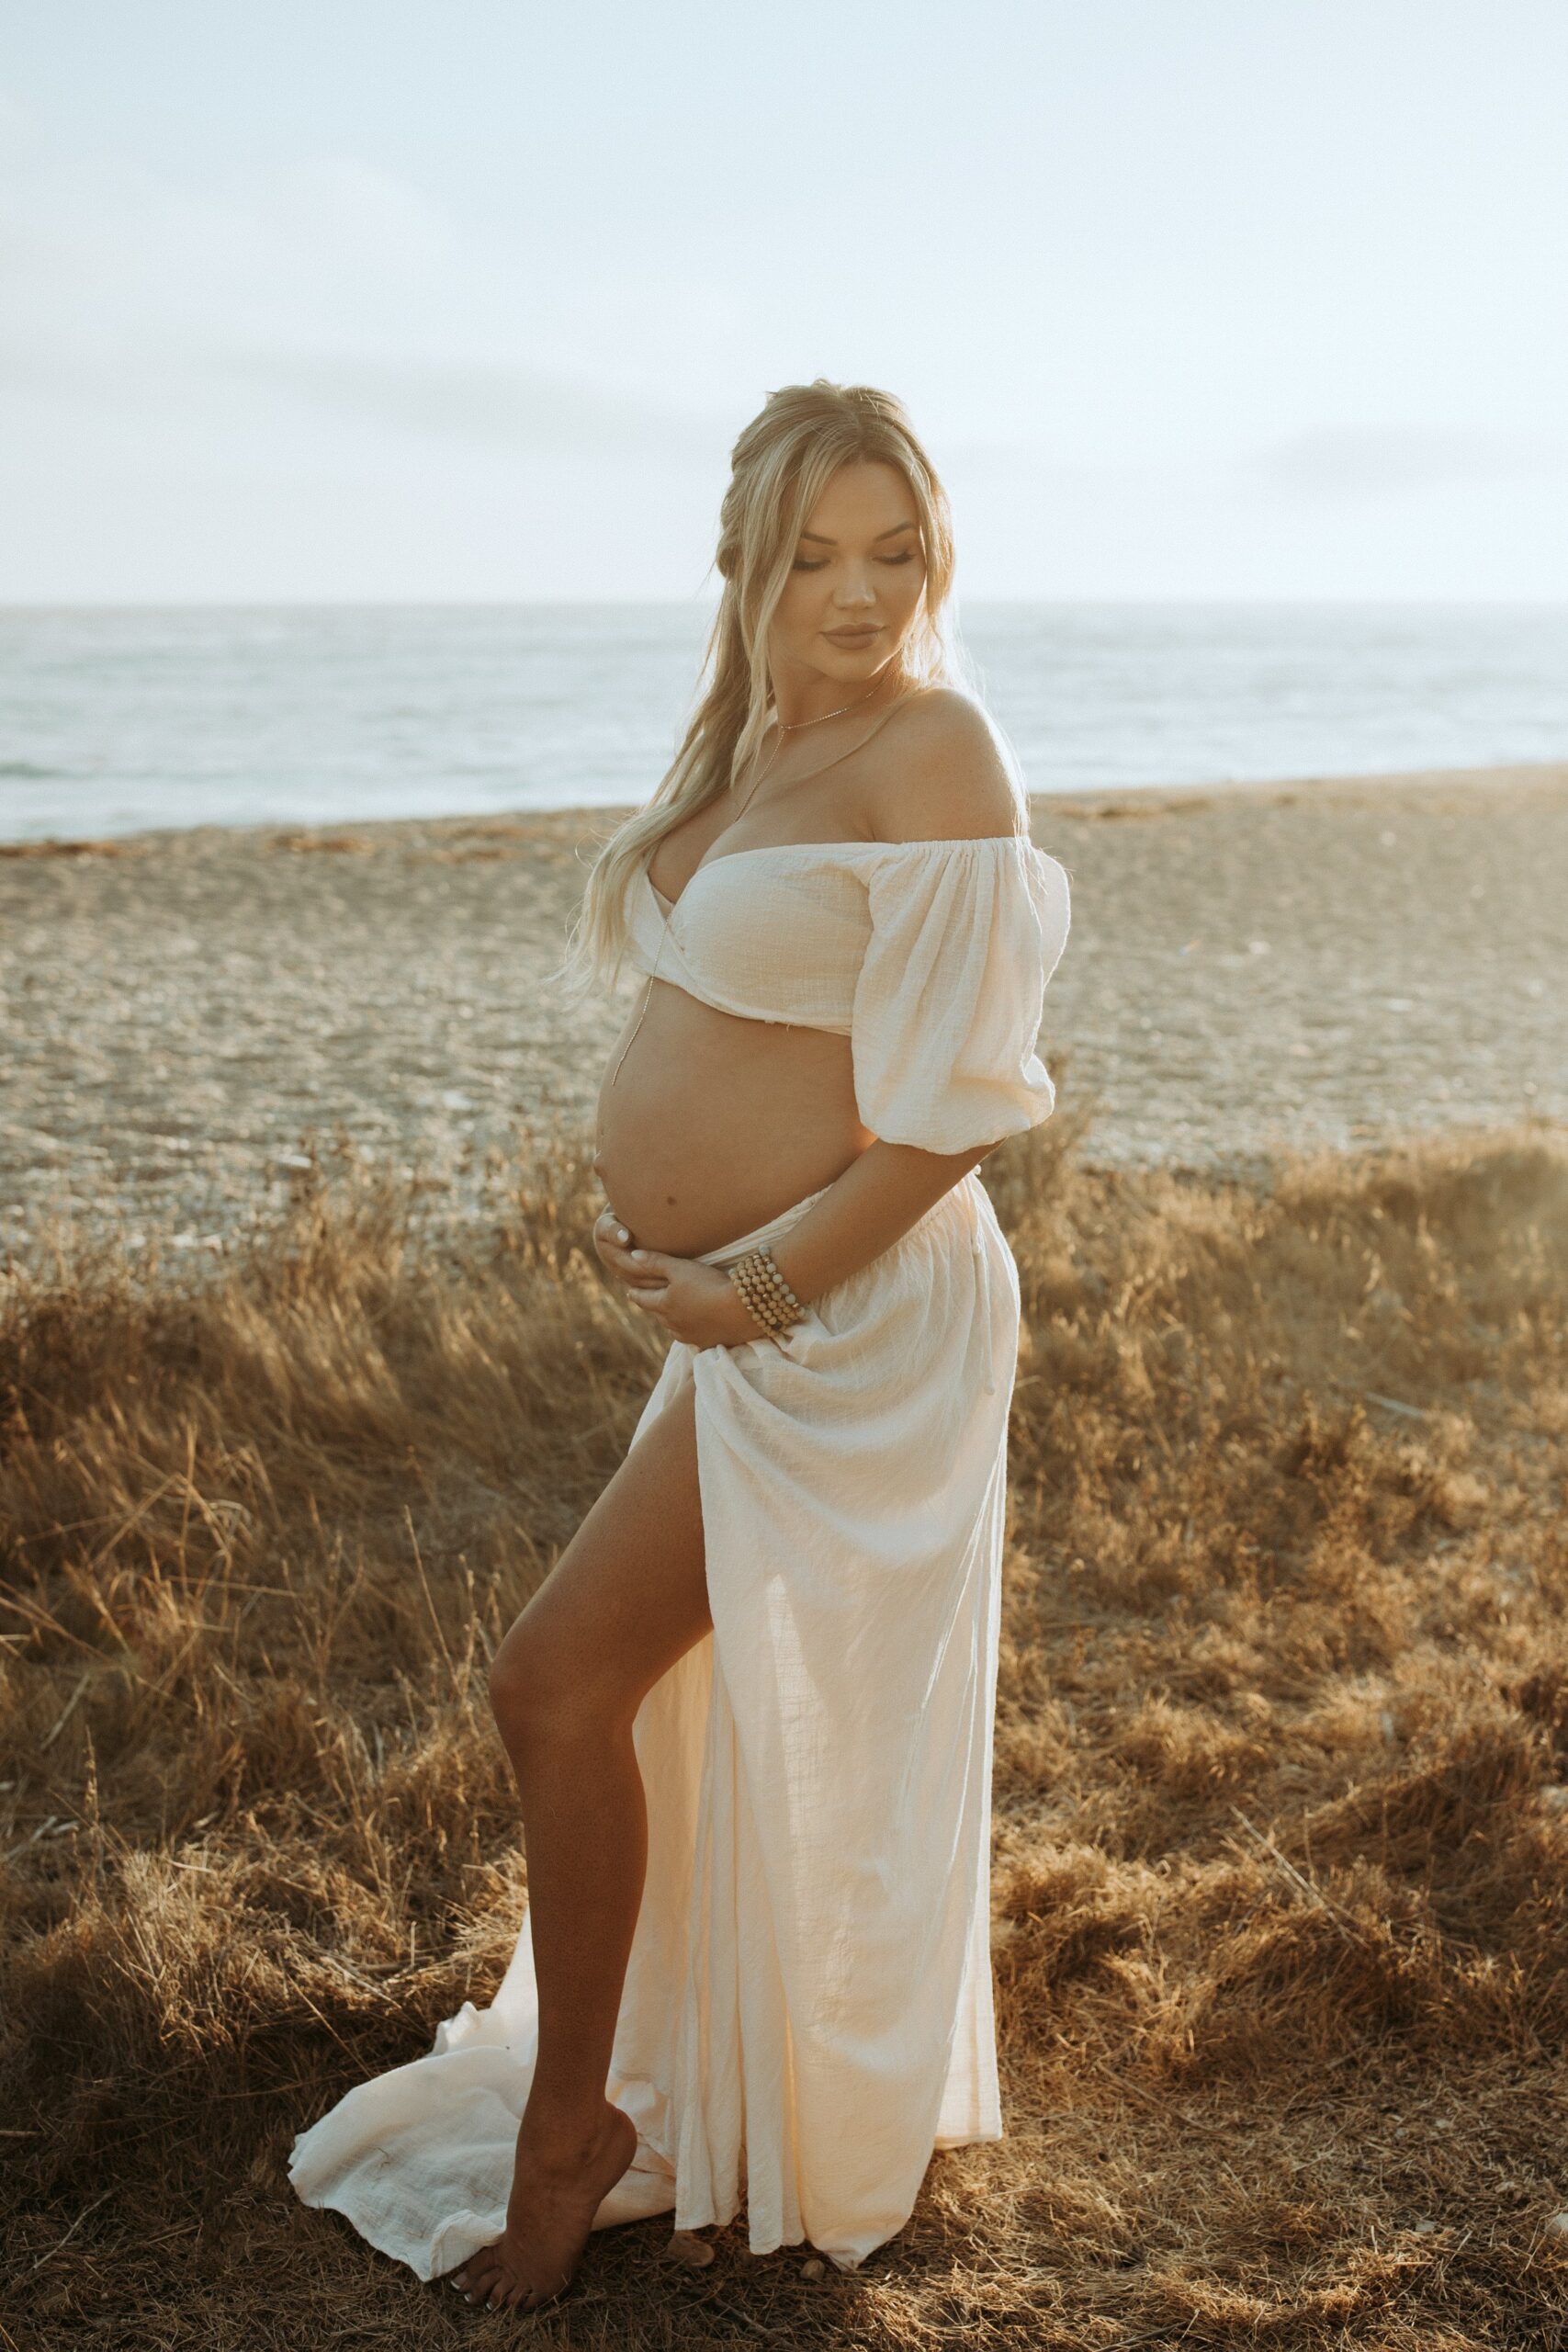 nuture-baby-photography-maternity-beach-session84.jpg